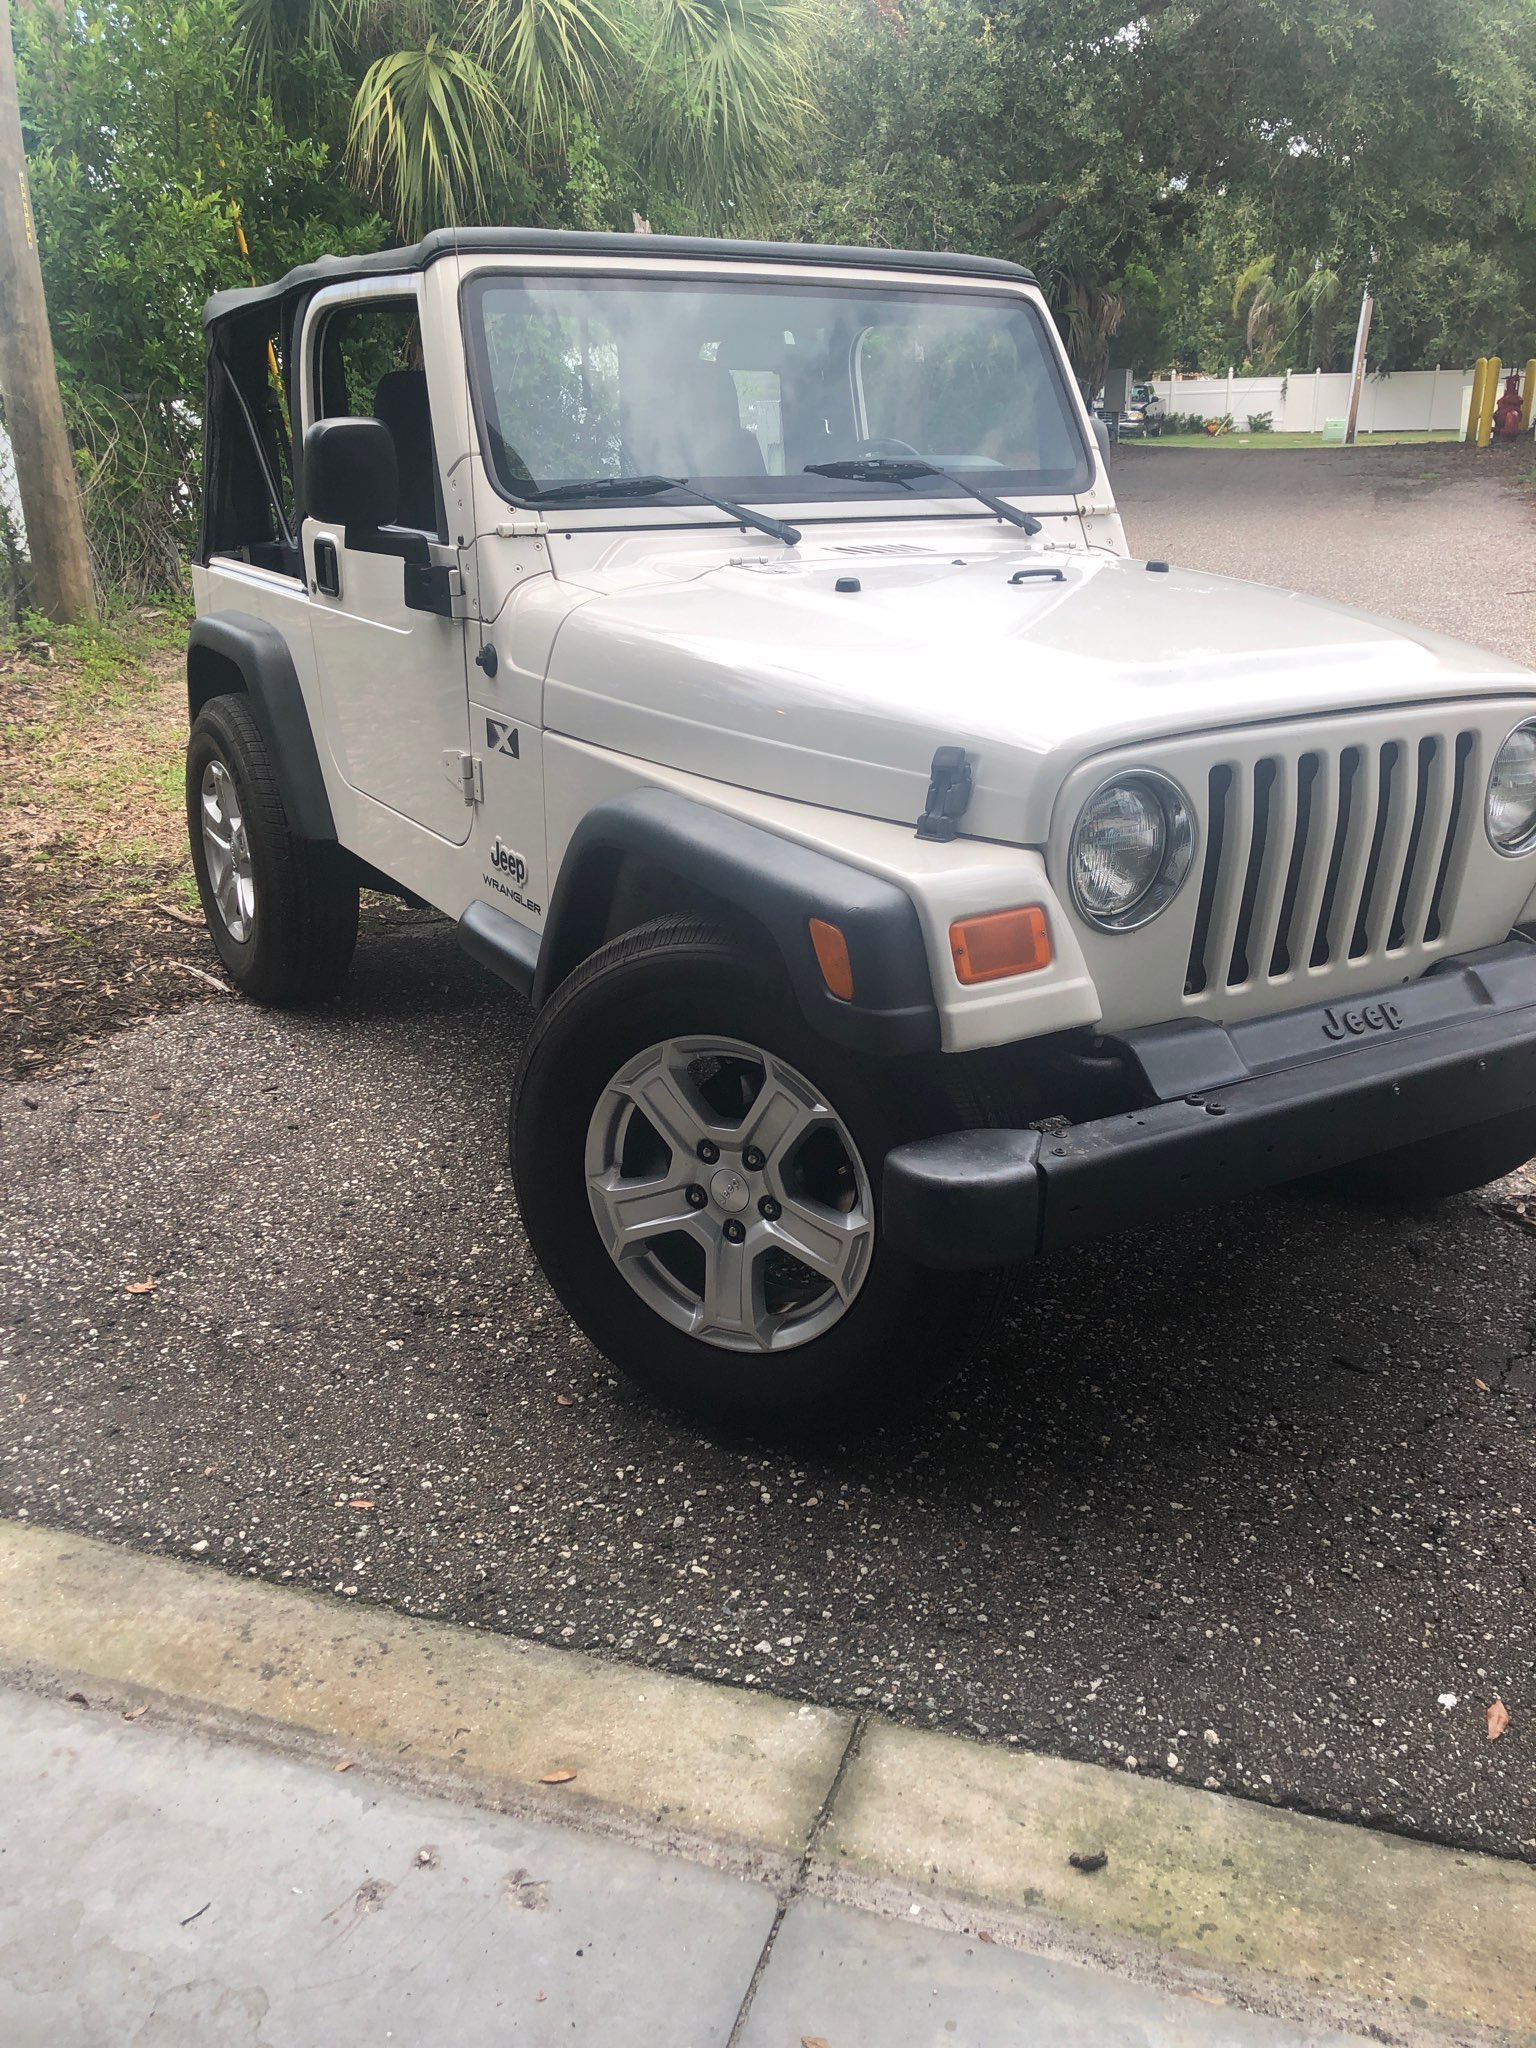 JL tires and wheels on my TJ